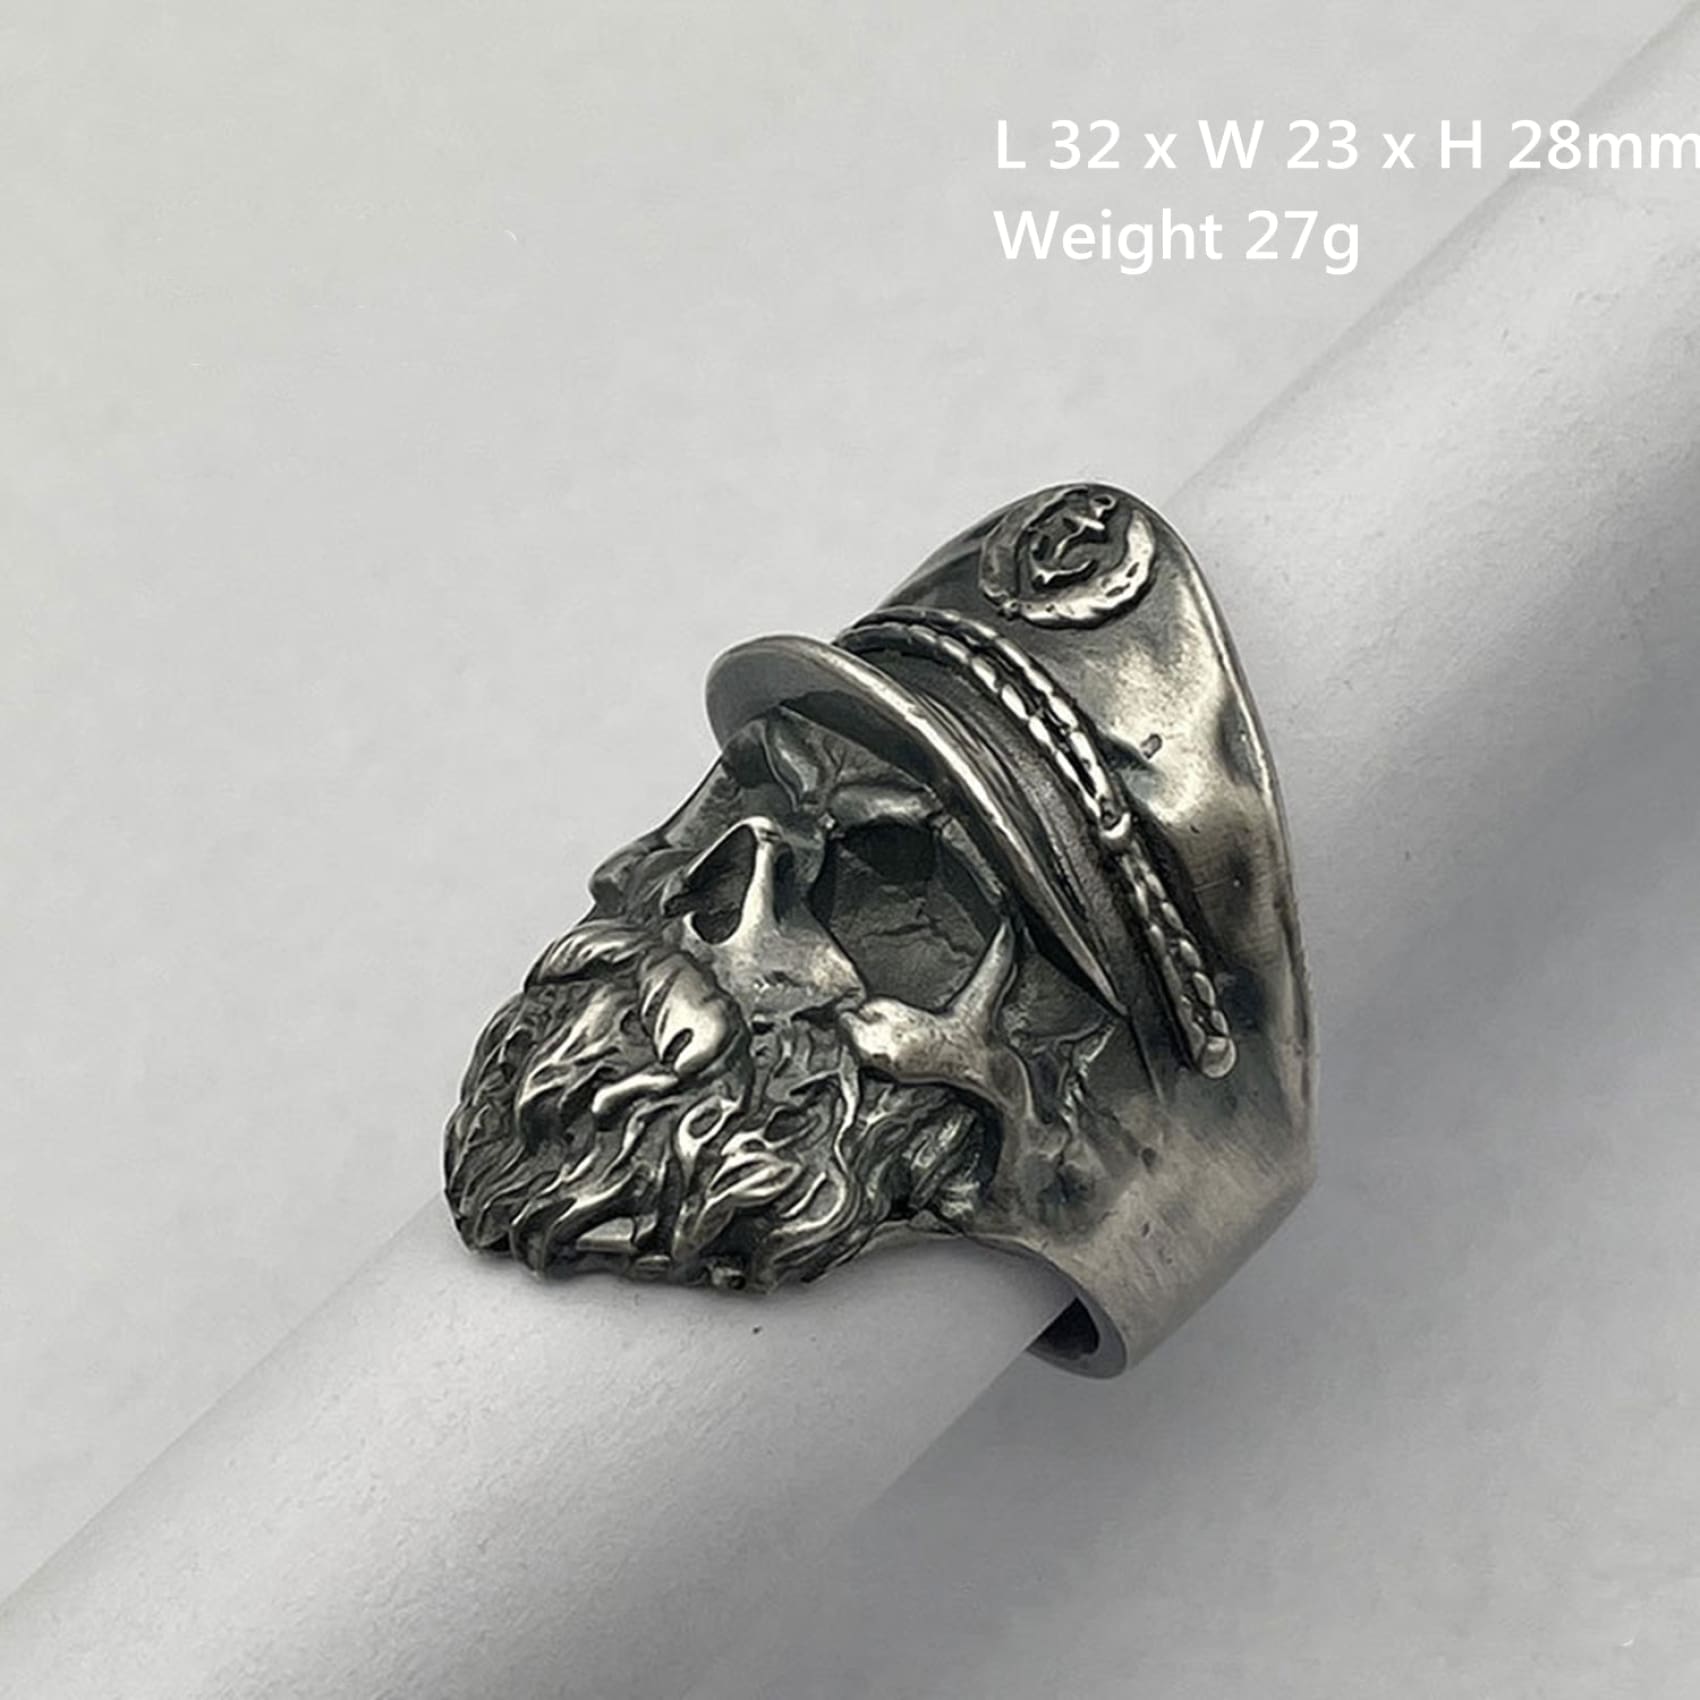 Pirate Captain 925 Sterling Silver Ring,Gifts For Friends - 1pcs - Rings